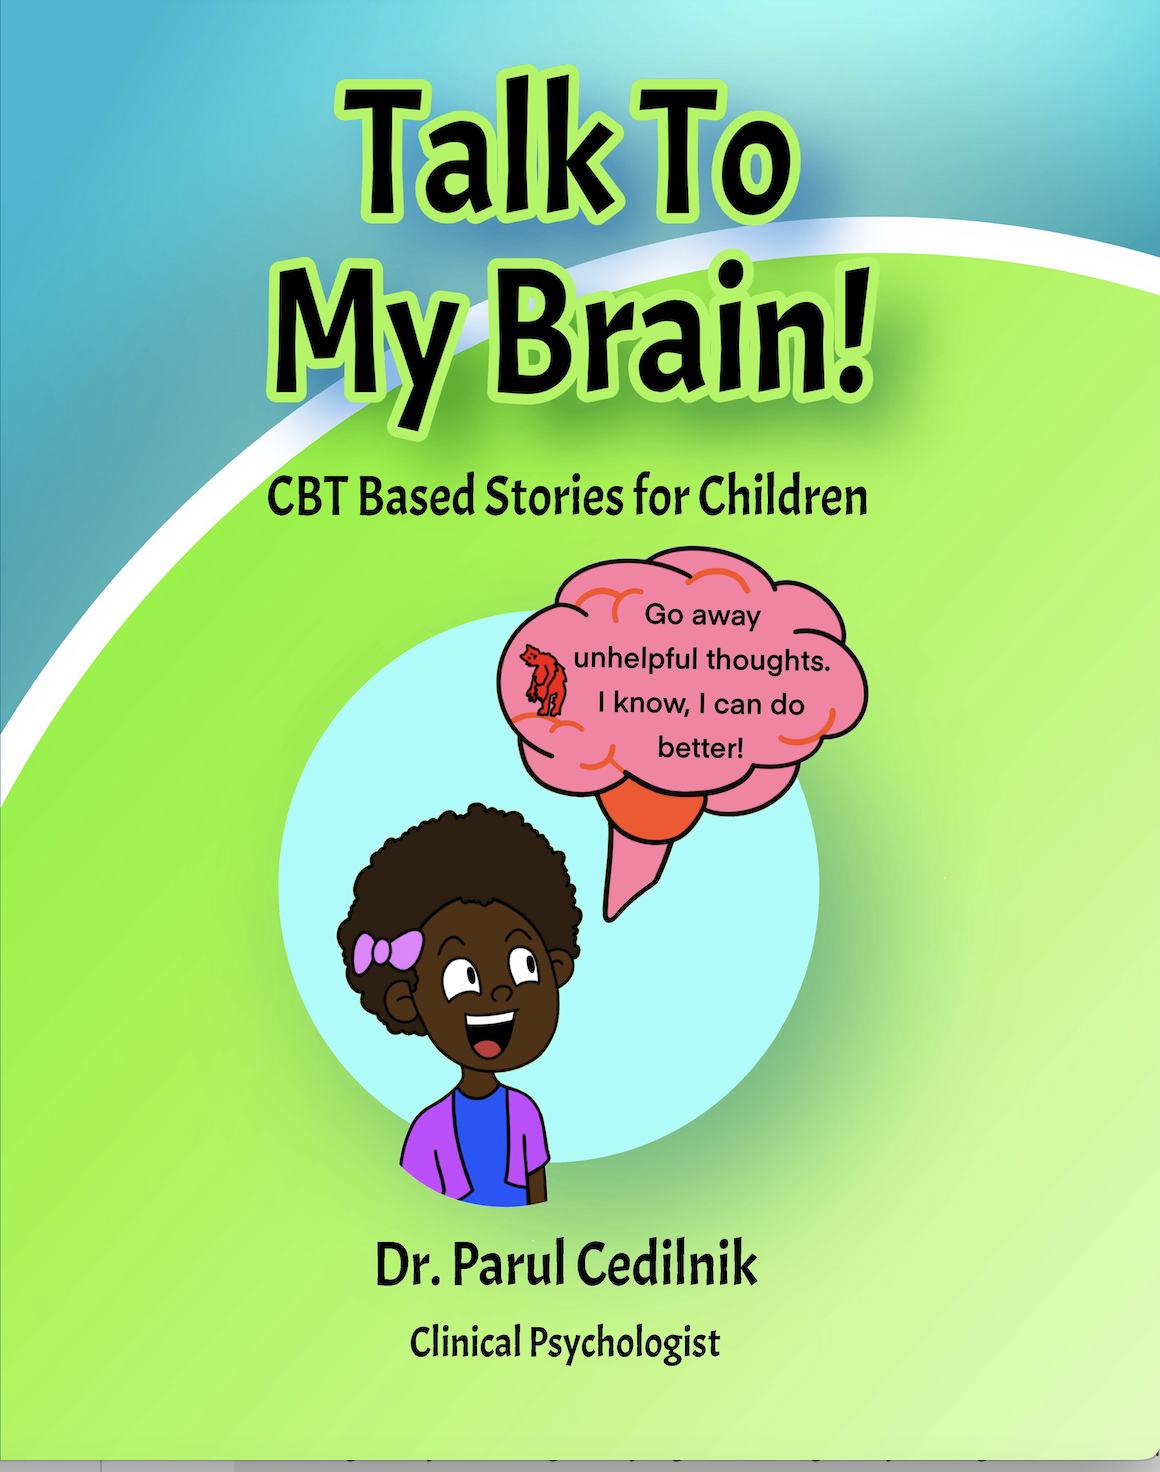 Talk to My Brain: CBT Based Stories for Children by Dr. Parul Cedilnik